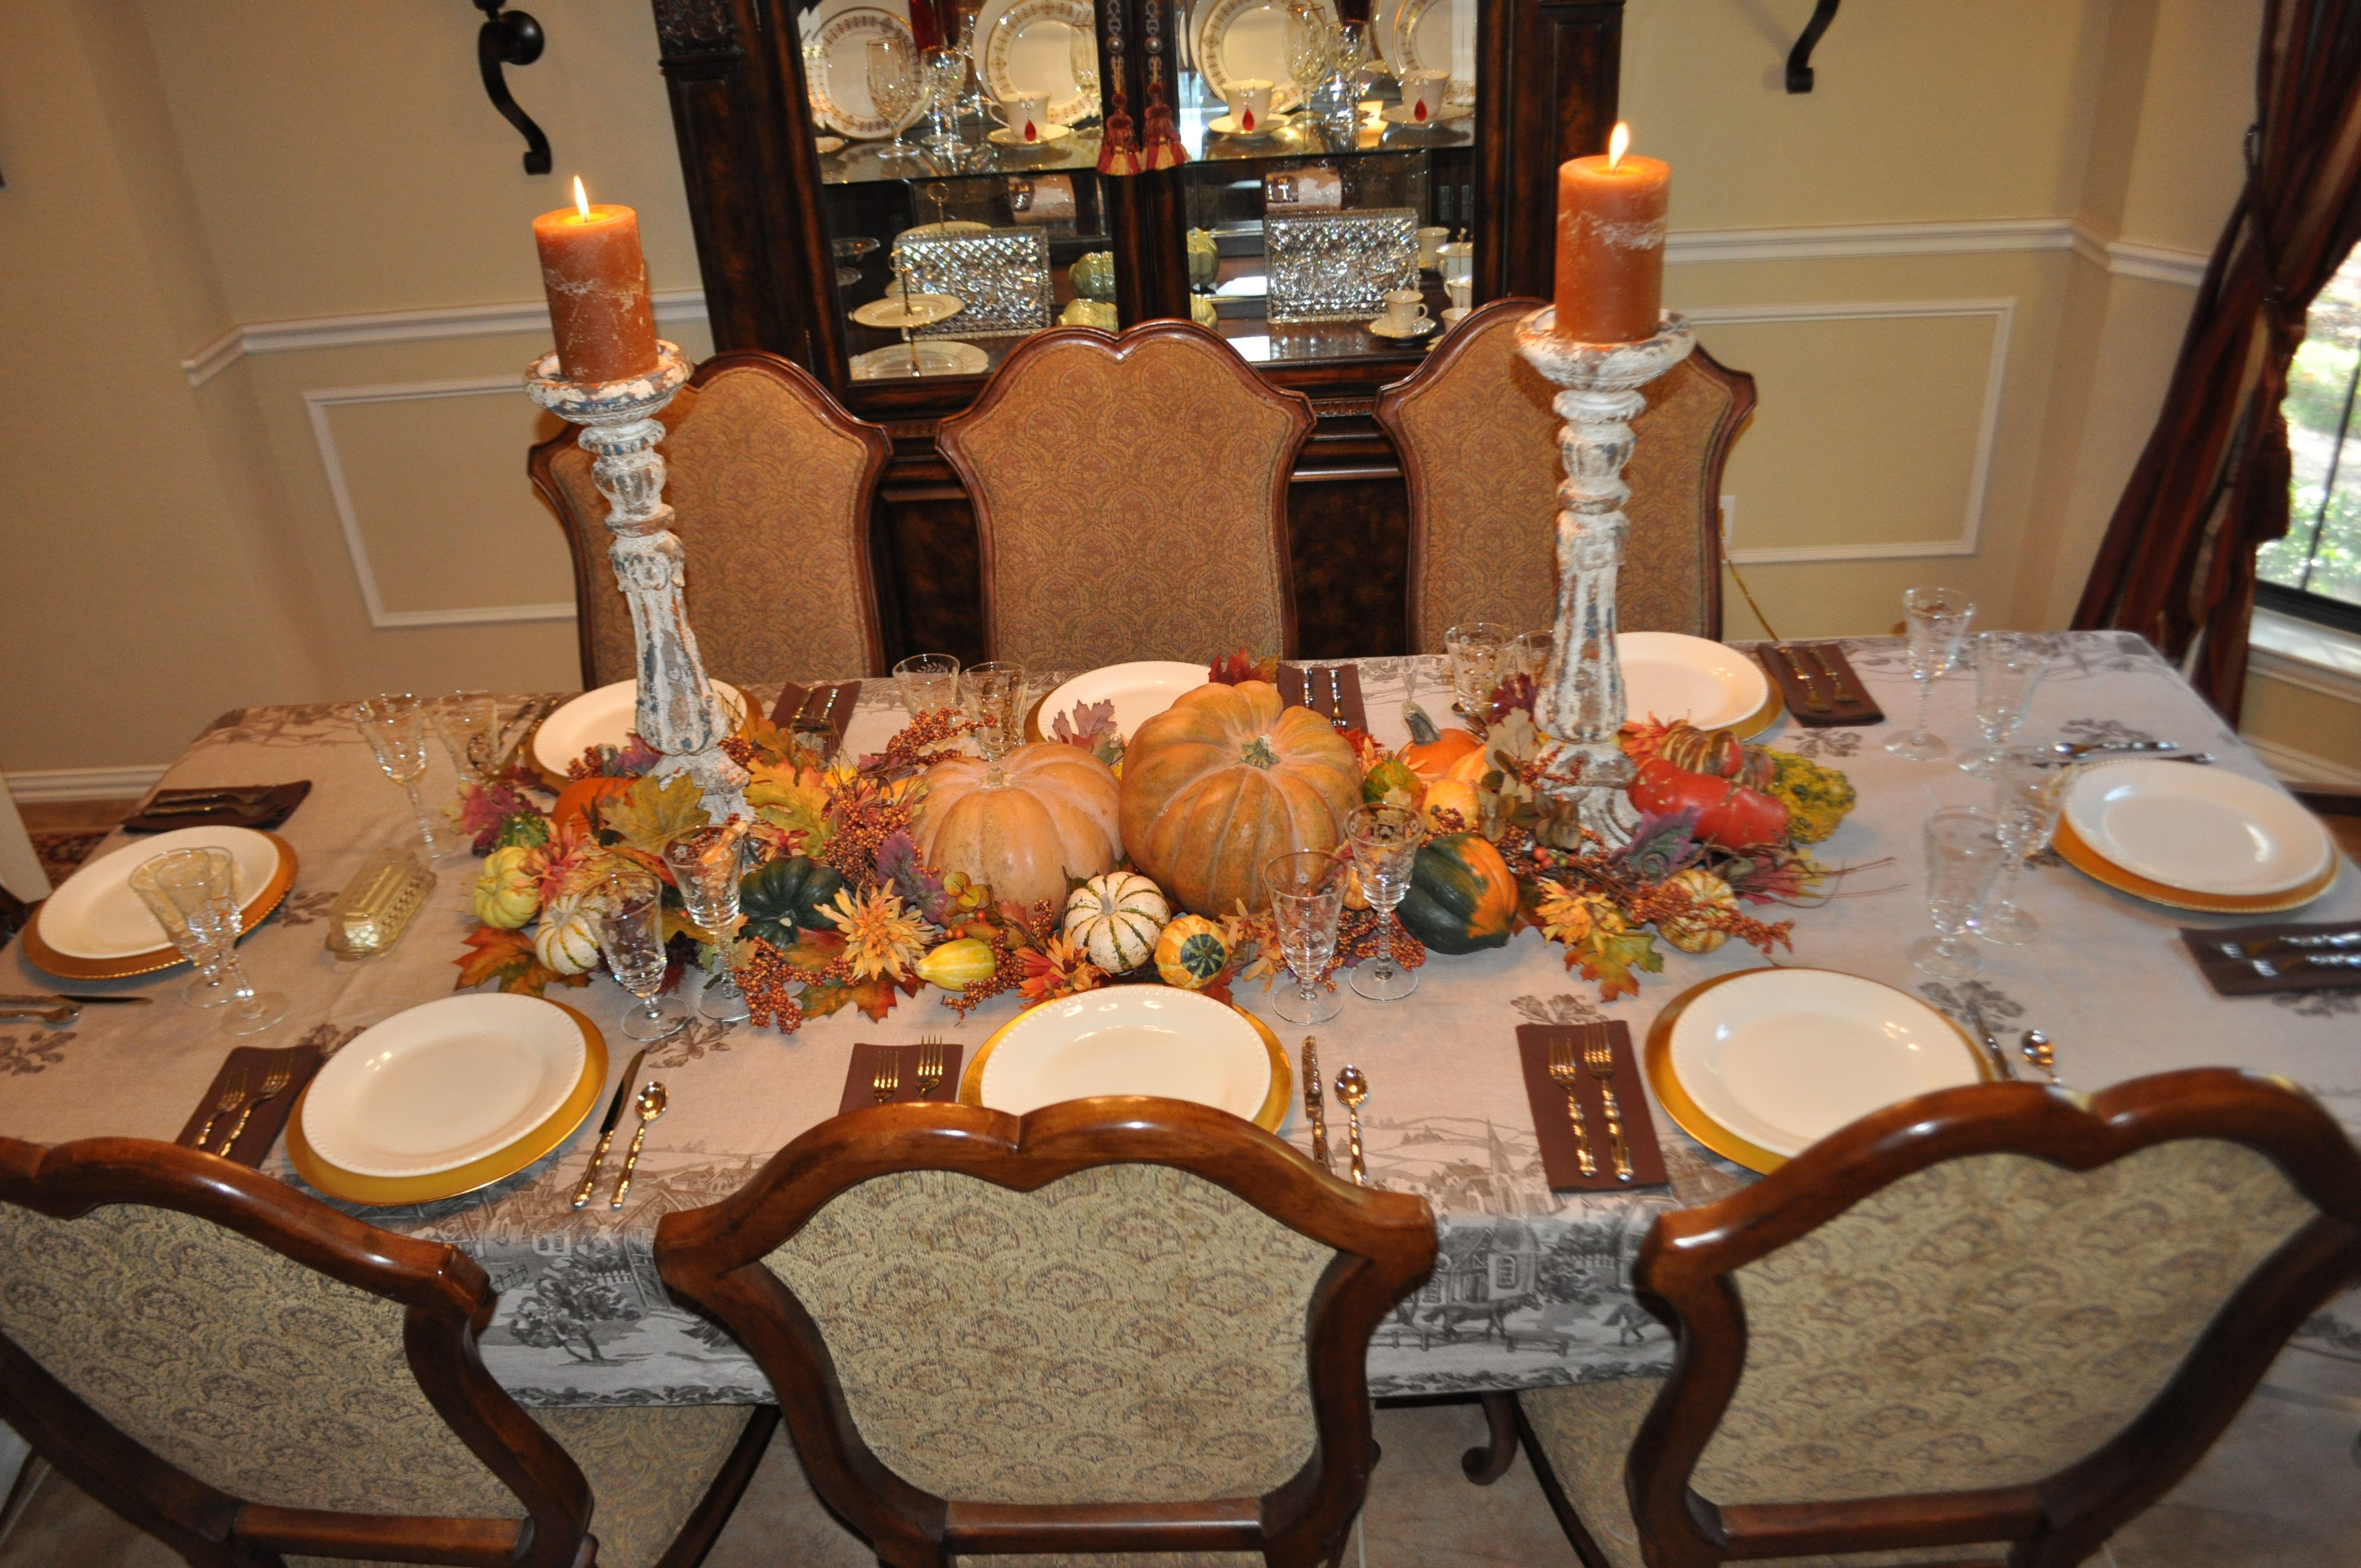 Thanksgiving Table Decorations Pinterest
 Thanksgiving table decor Holidays